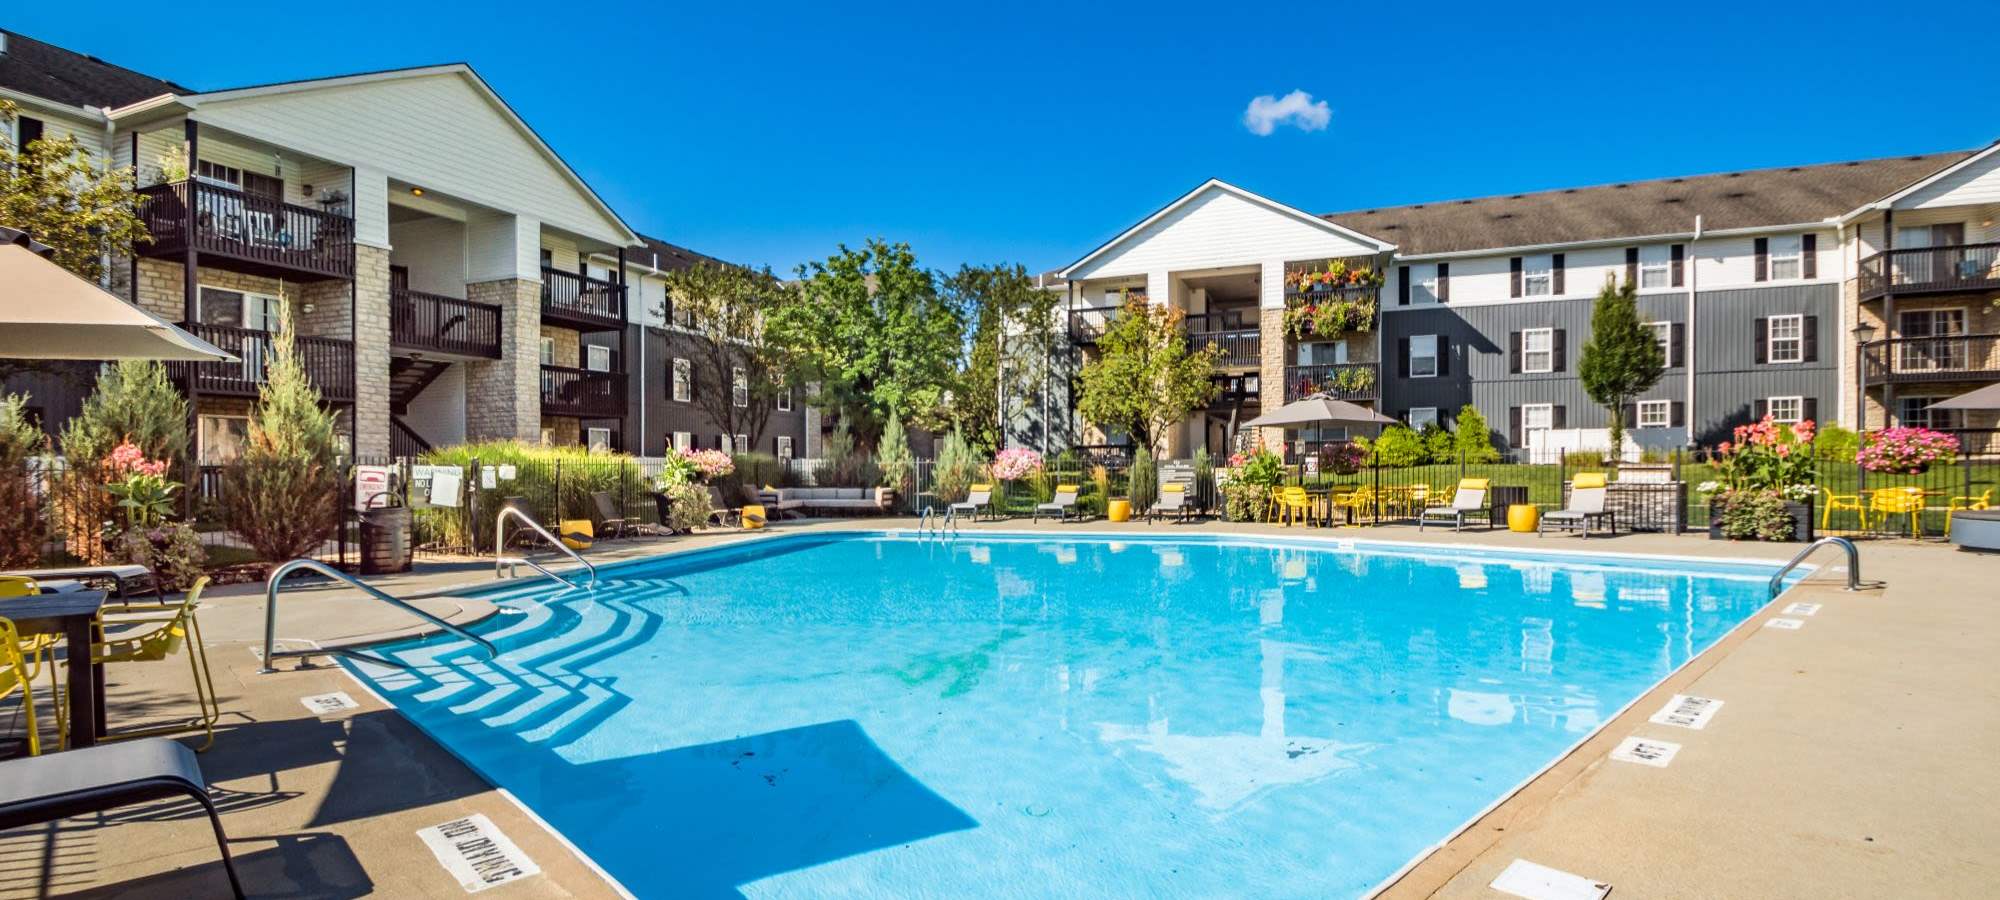 Apartments in Westerville Ohio